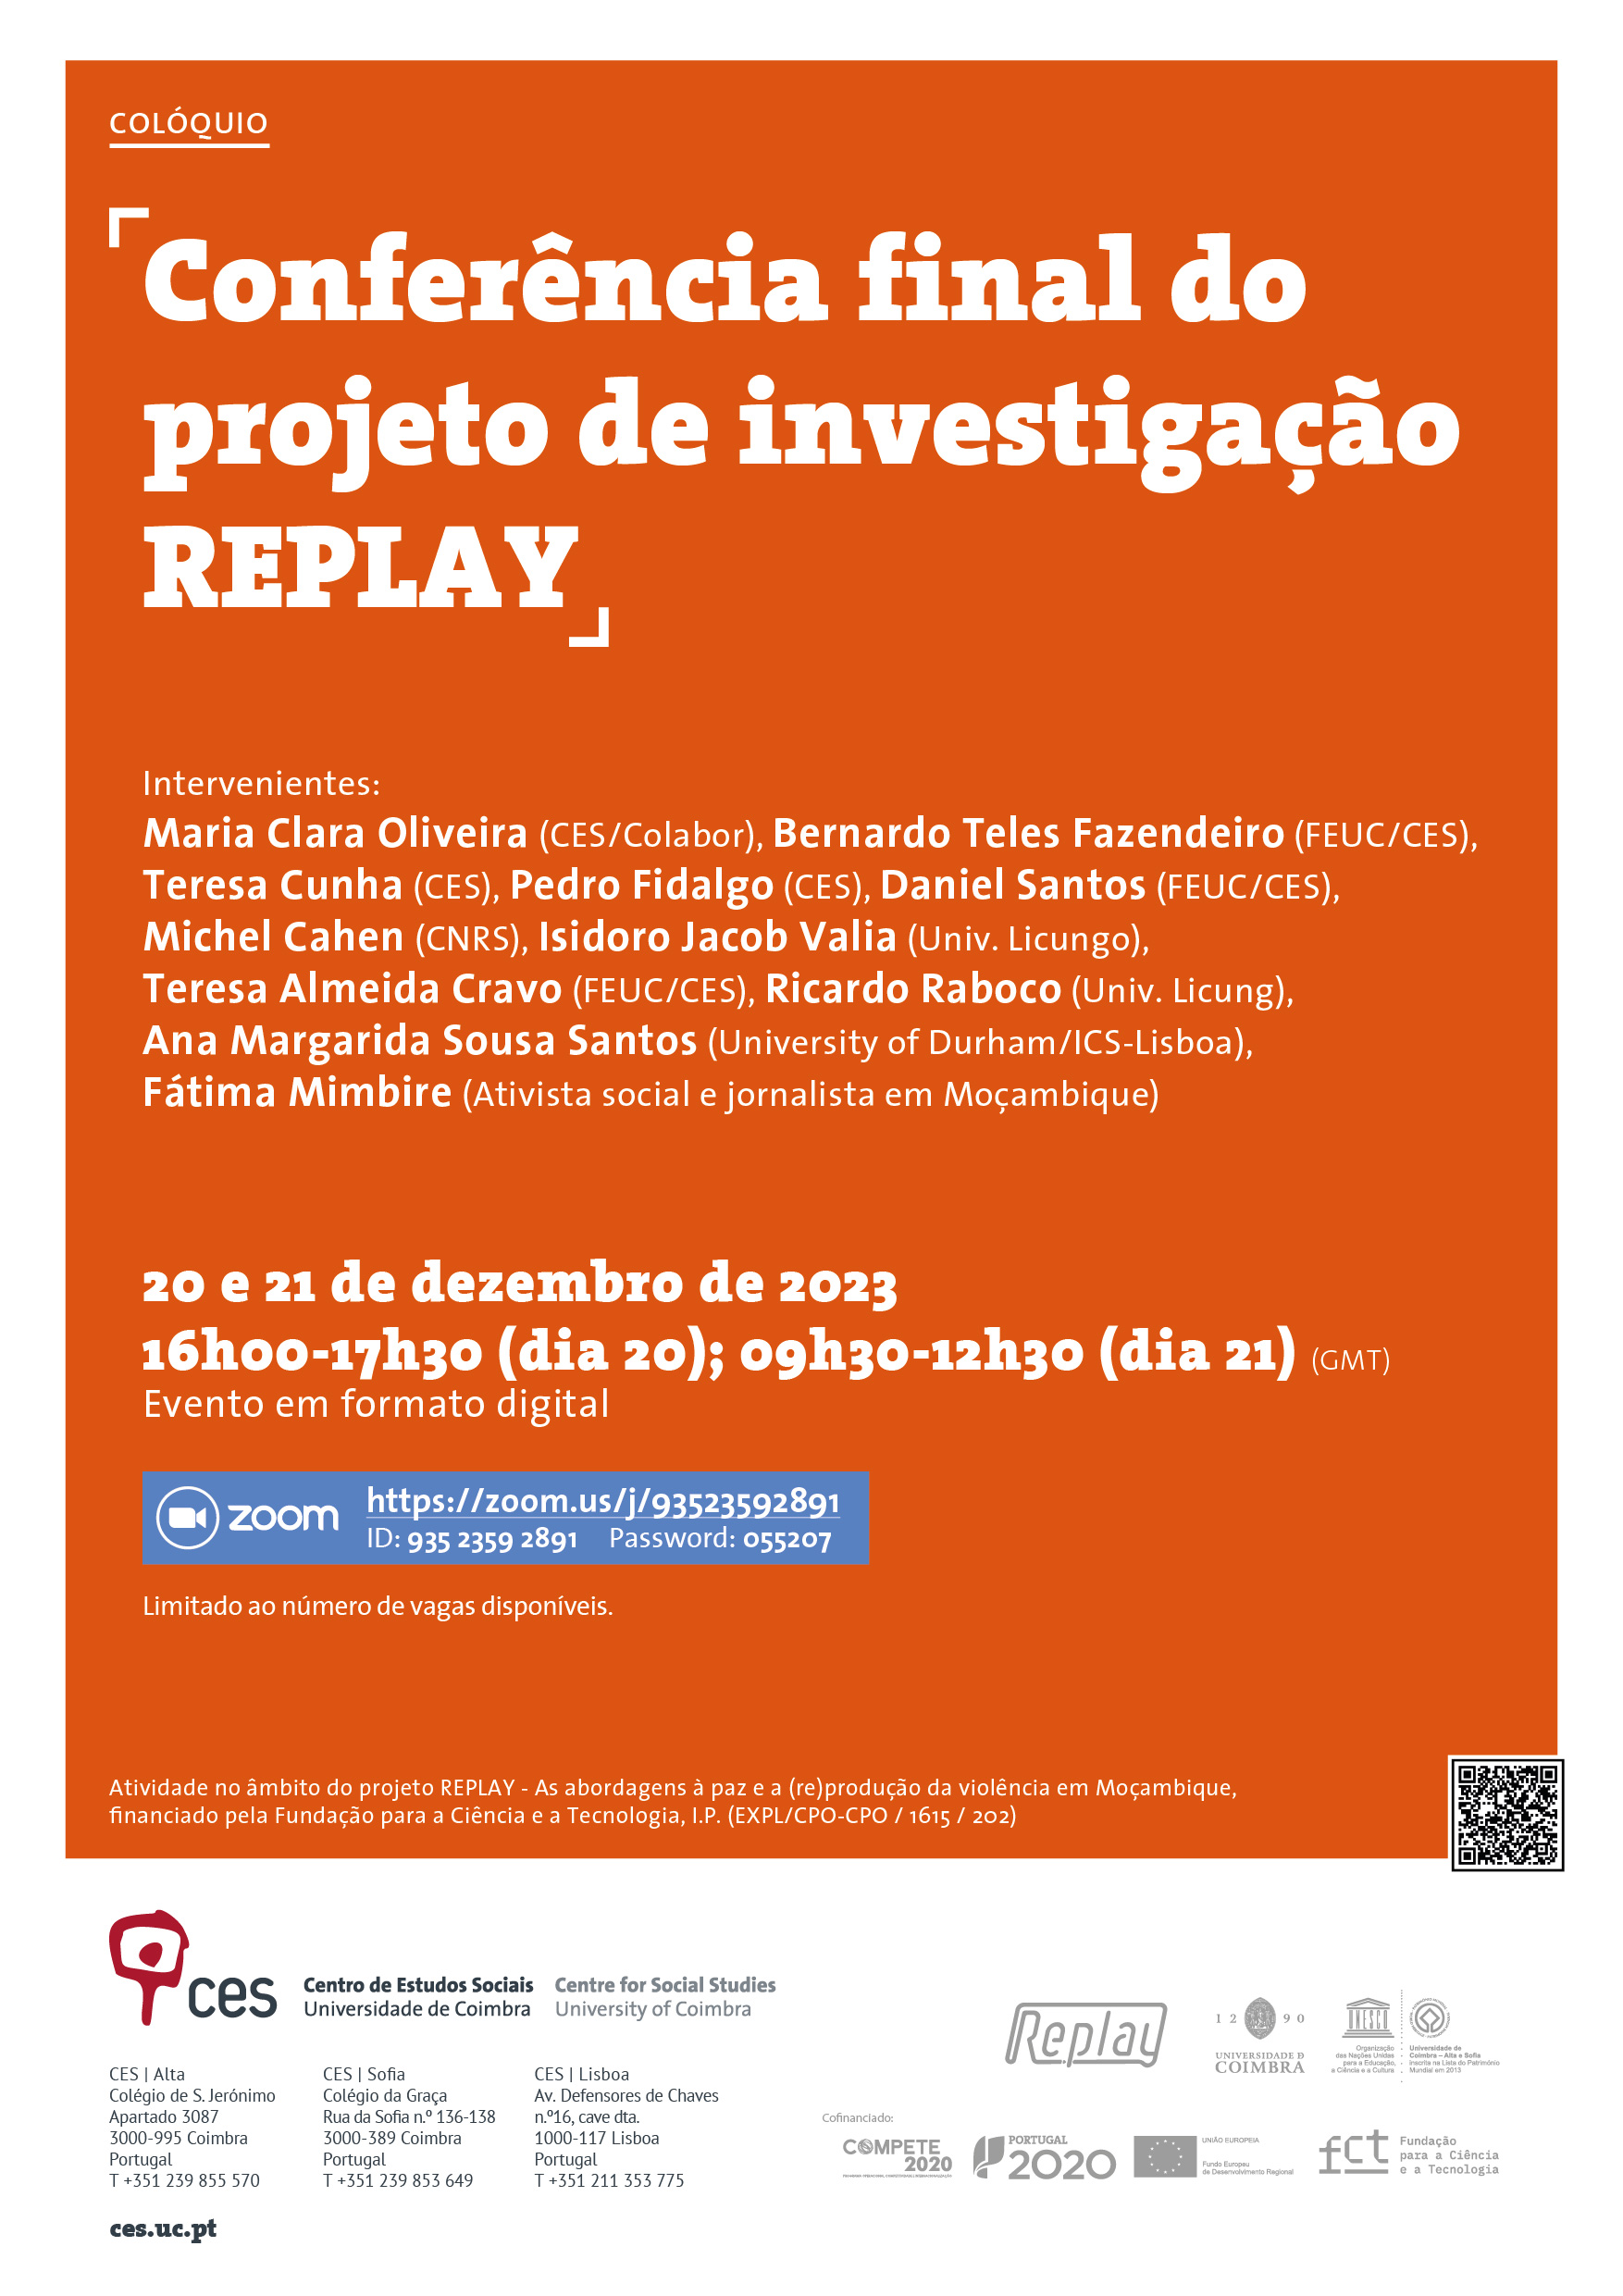 REPLAY research project final conference<span id="edit_44846"><script>$(function() { $('#edit_44846').load( "/myces/user/editobj.php?tipo=evento&id=44846" ); });</script></span>